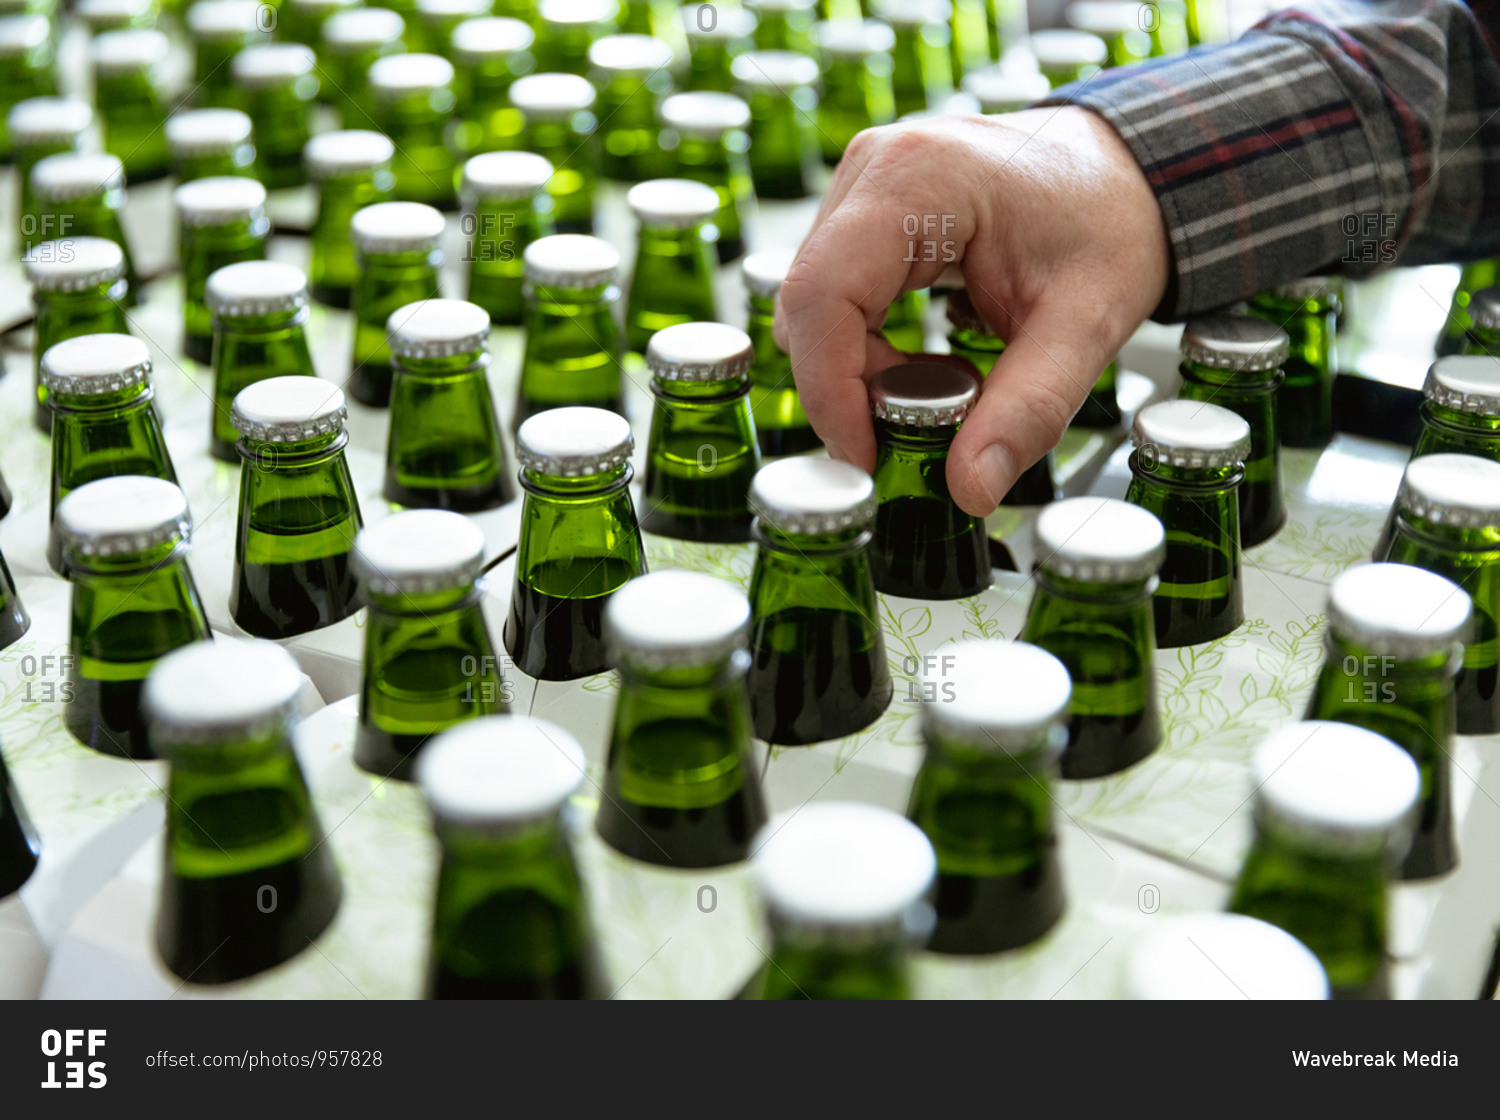 Close up mid section view of a Caucasian man working in a microbrewery, checking green glass bottles of beer ready for delivery.